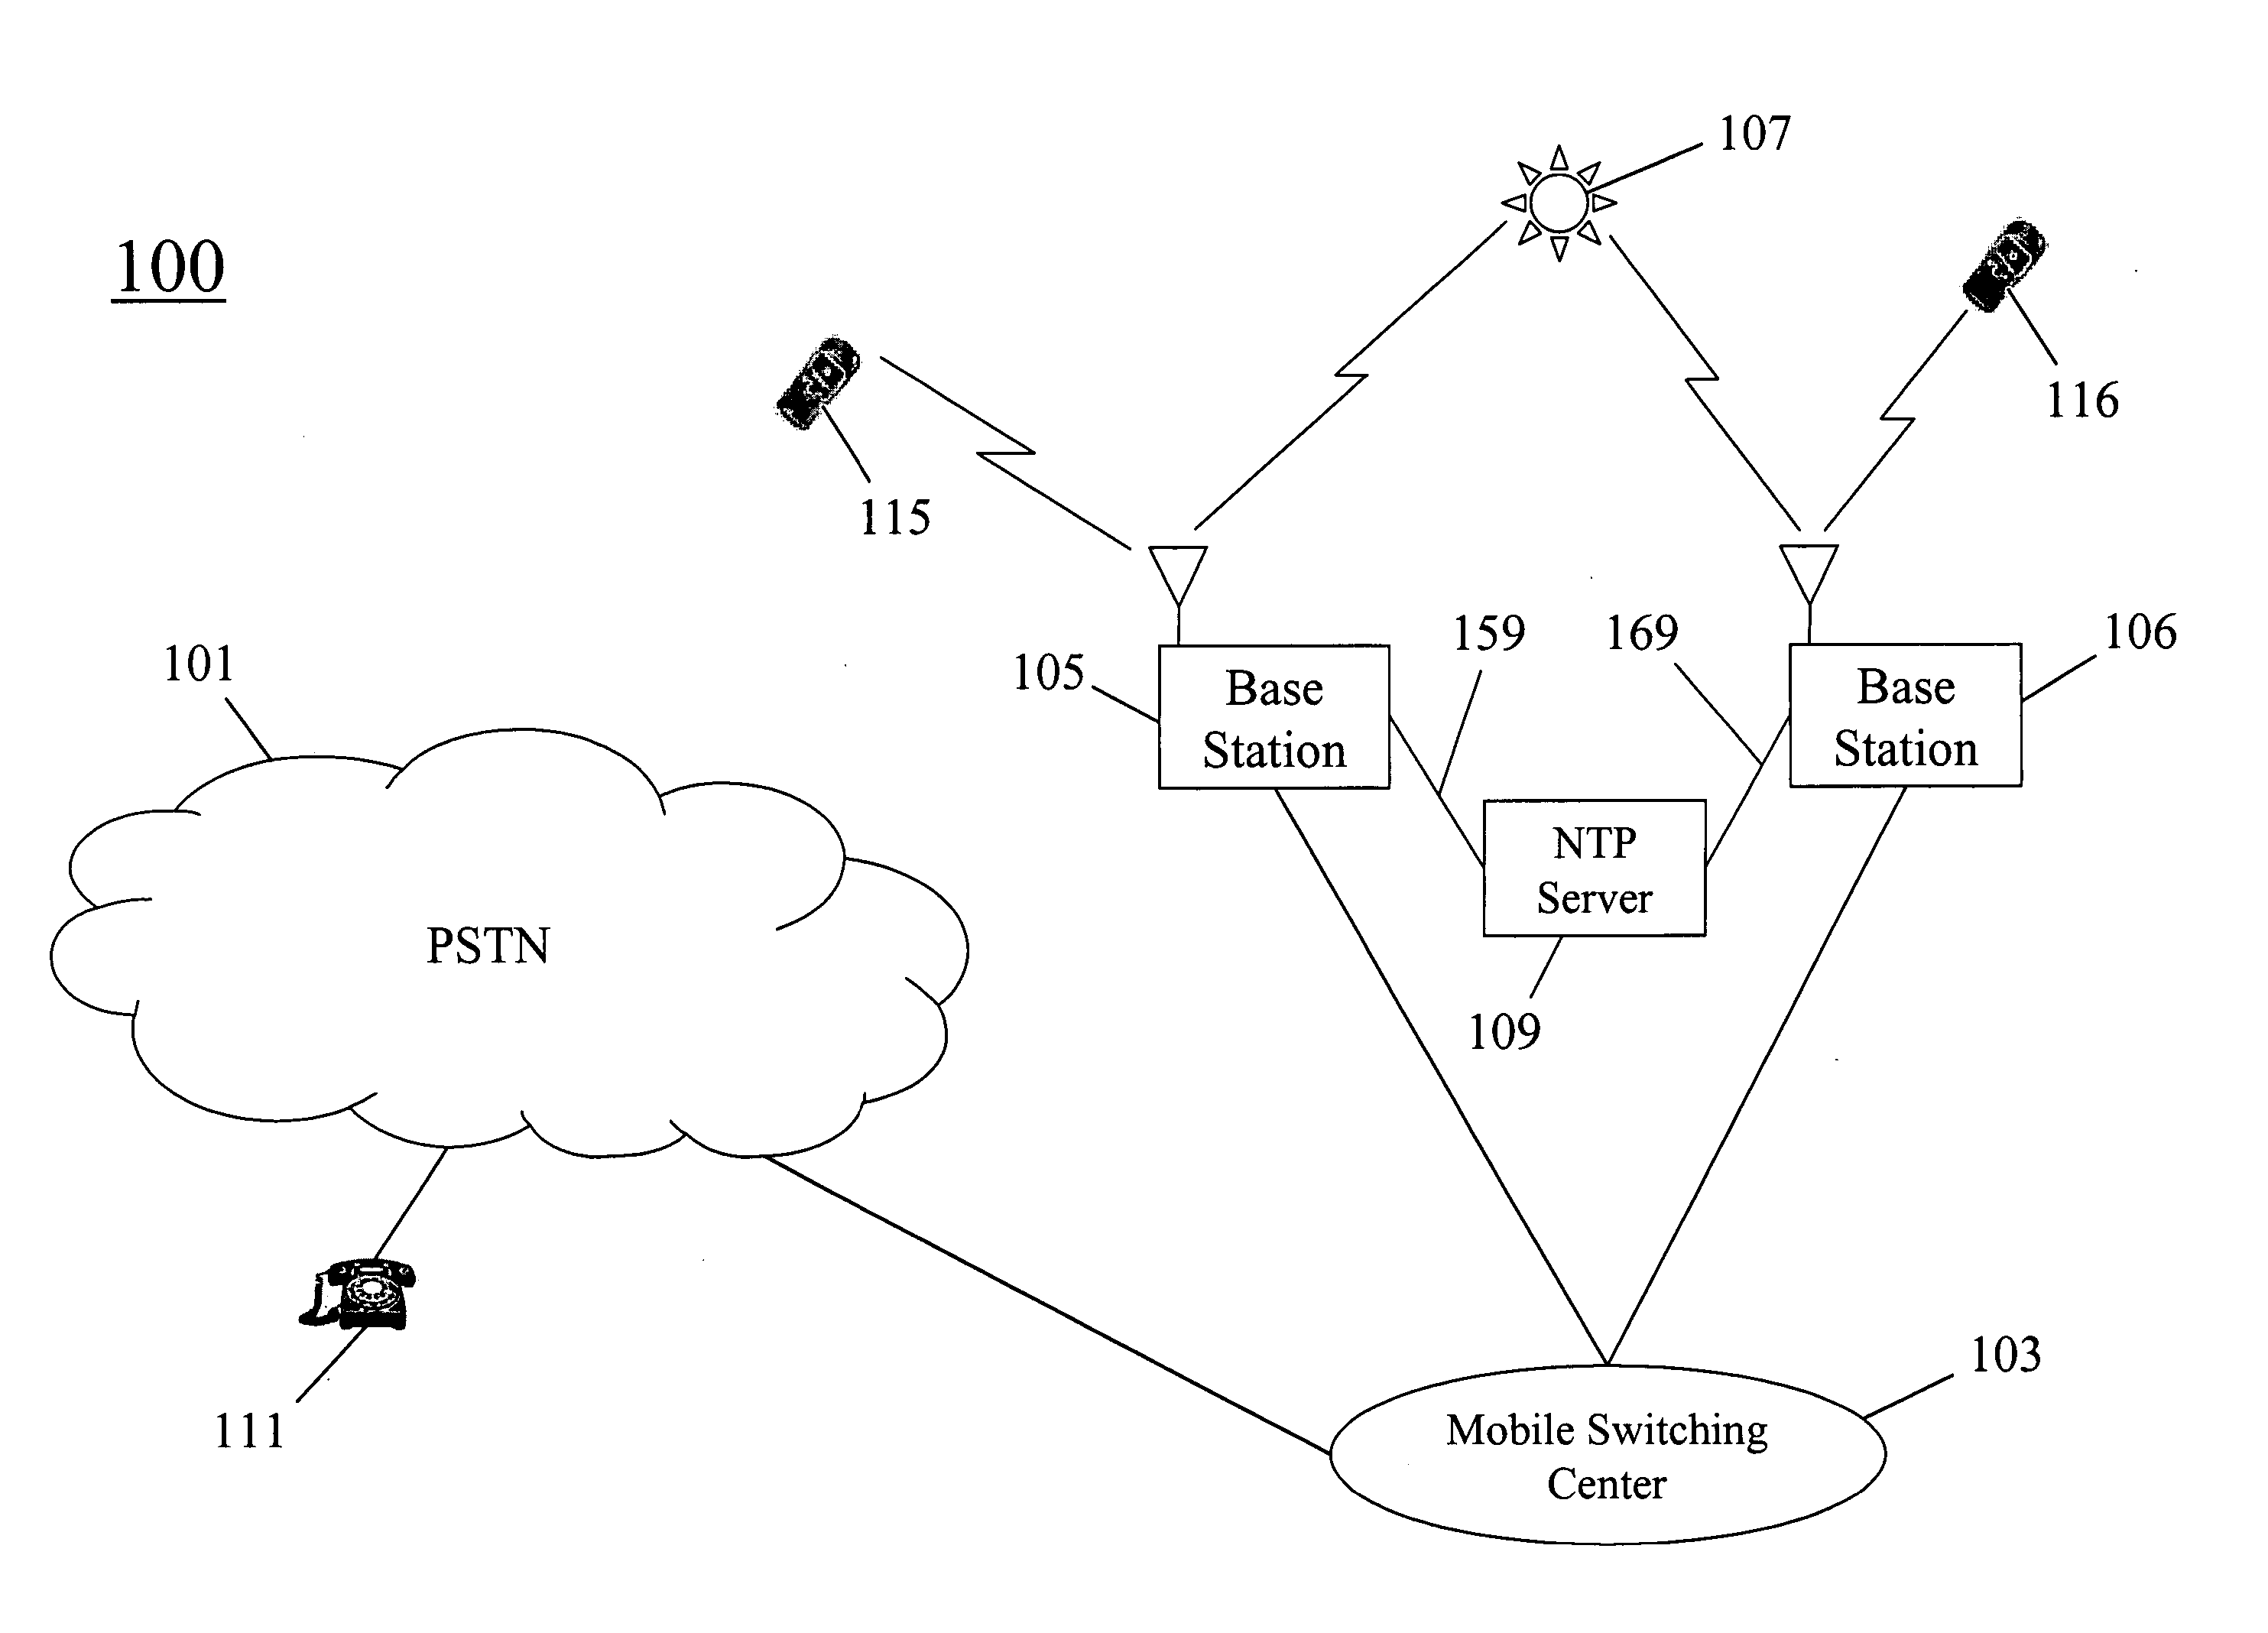 Method for utilizing a backup timing source when GPS becomes nonfunctional